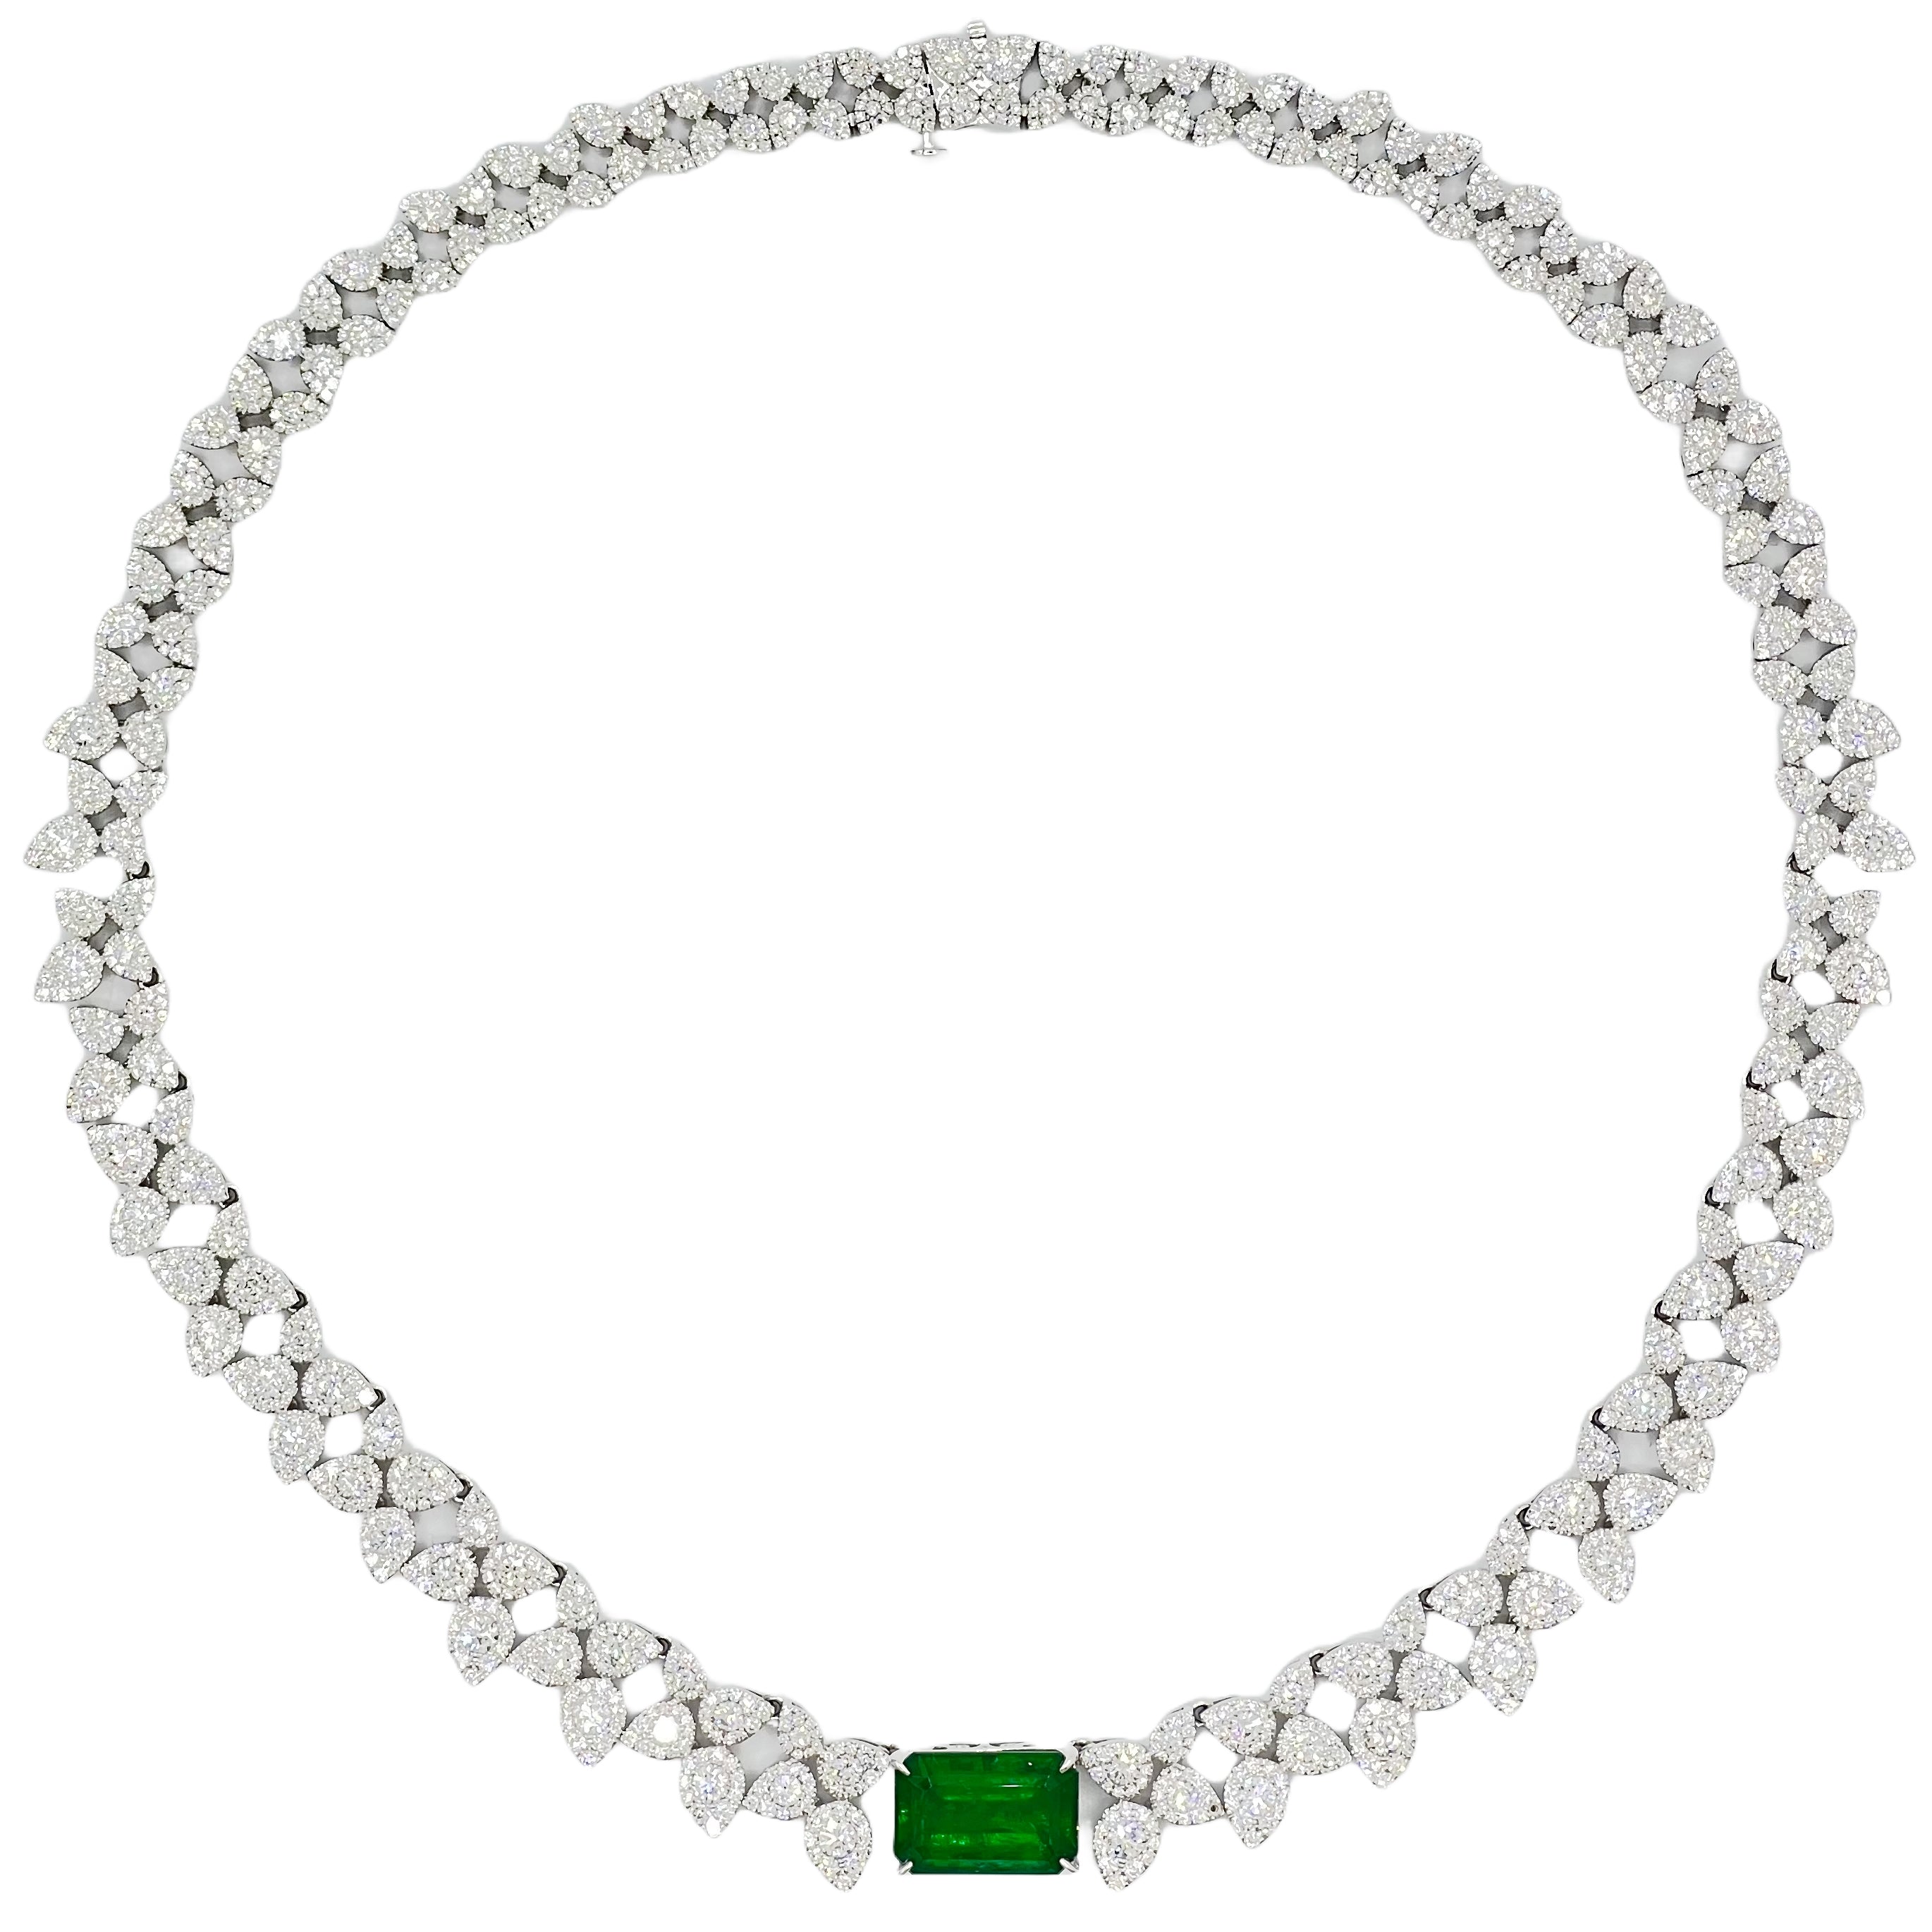 Necklace 18KW/65.1G 1EMER-10.72CT 56RD-5.18CT 2018RD-12.30CT